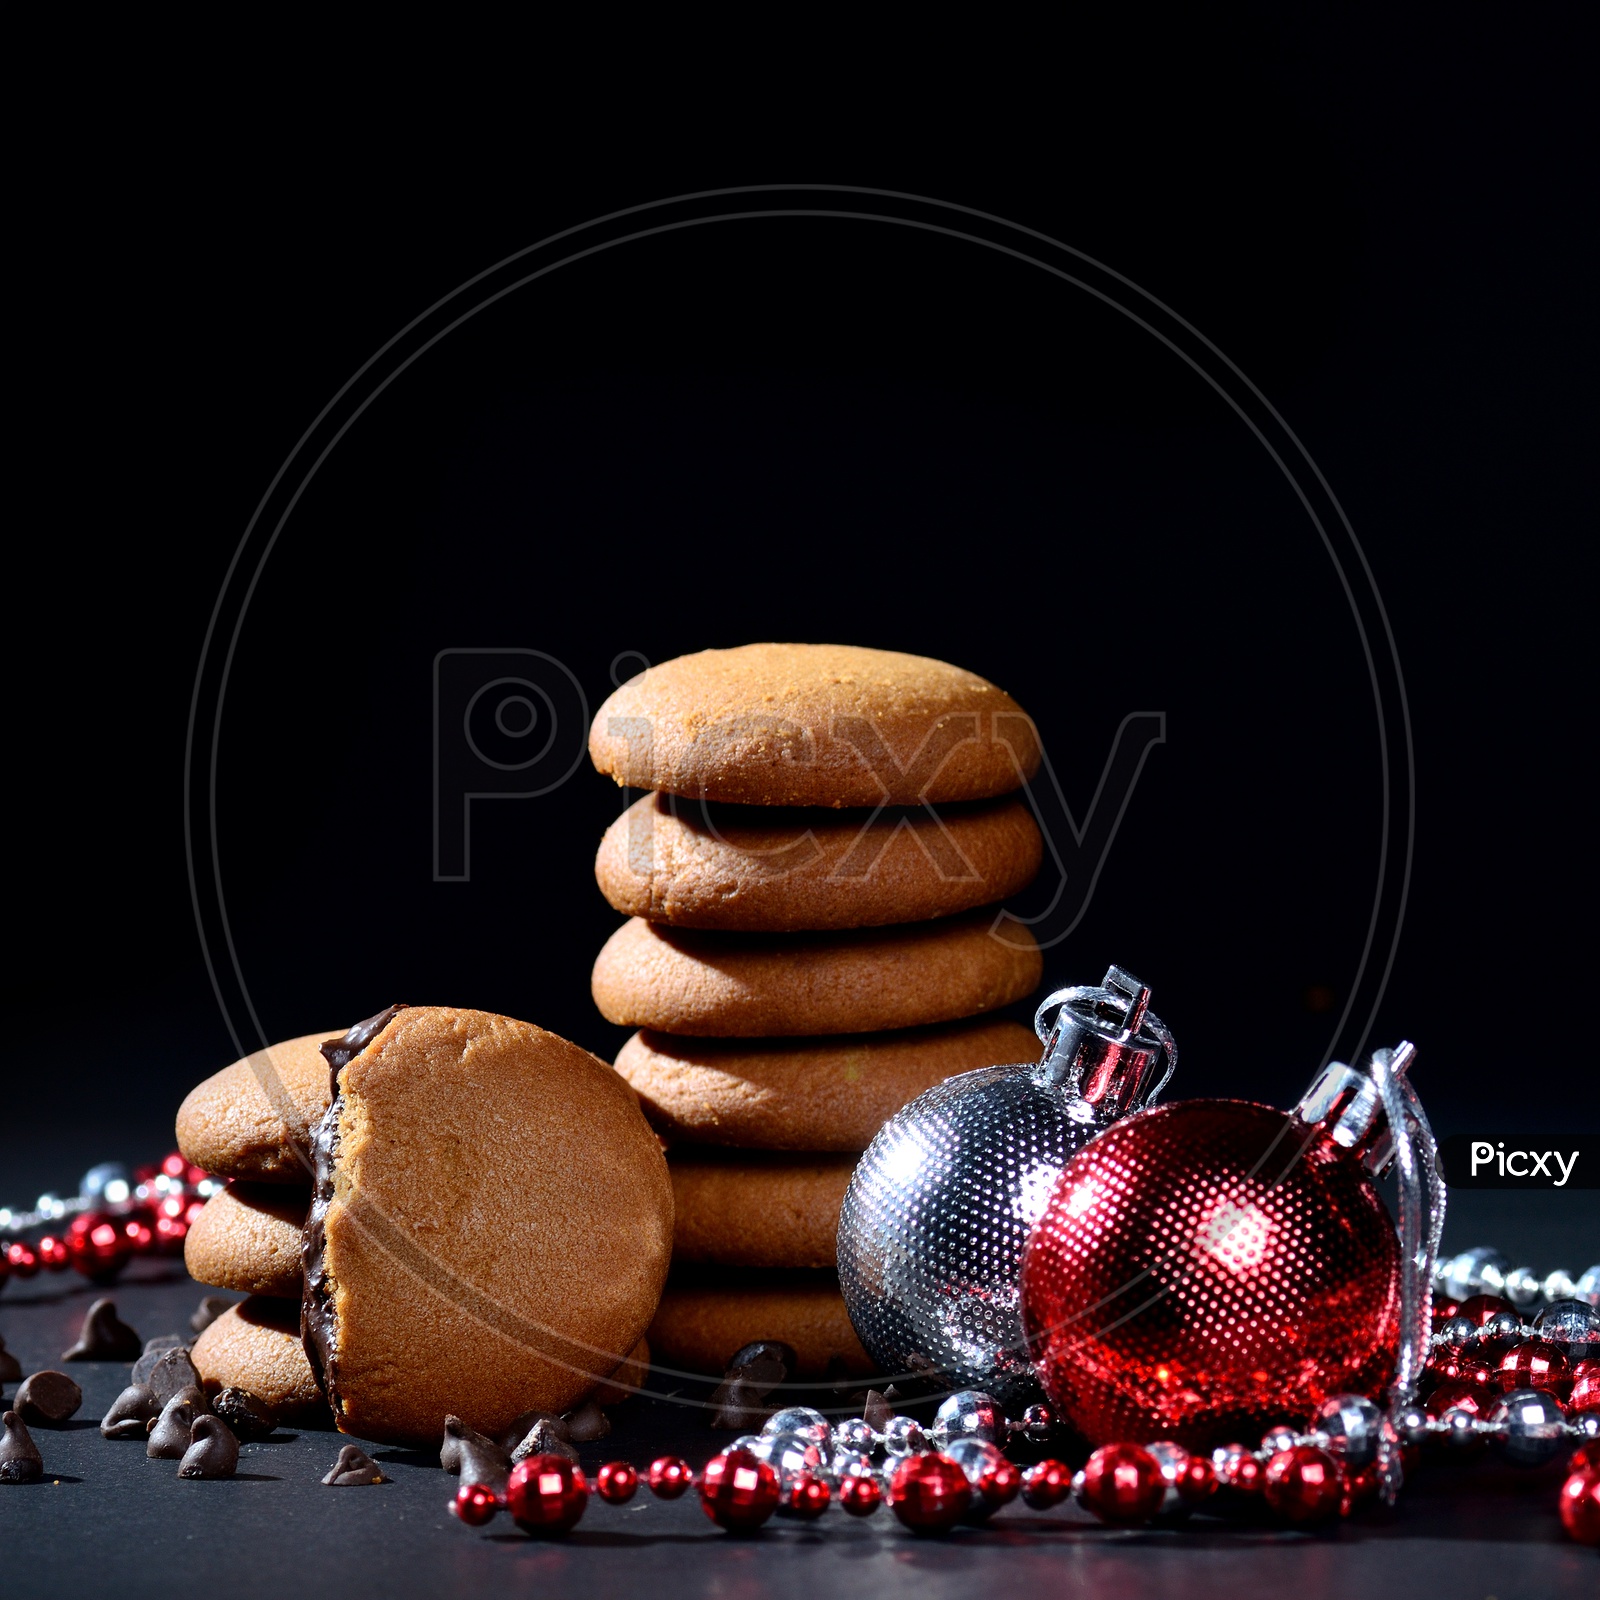 BISCUITS - Stack of delicious cream biscuits filled with chocolate cream decorated with Christmas Ornaments on black background